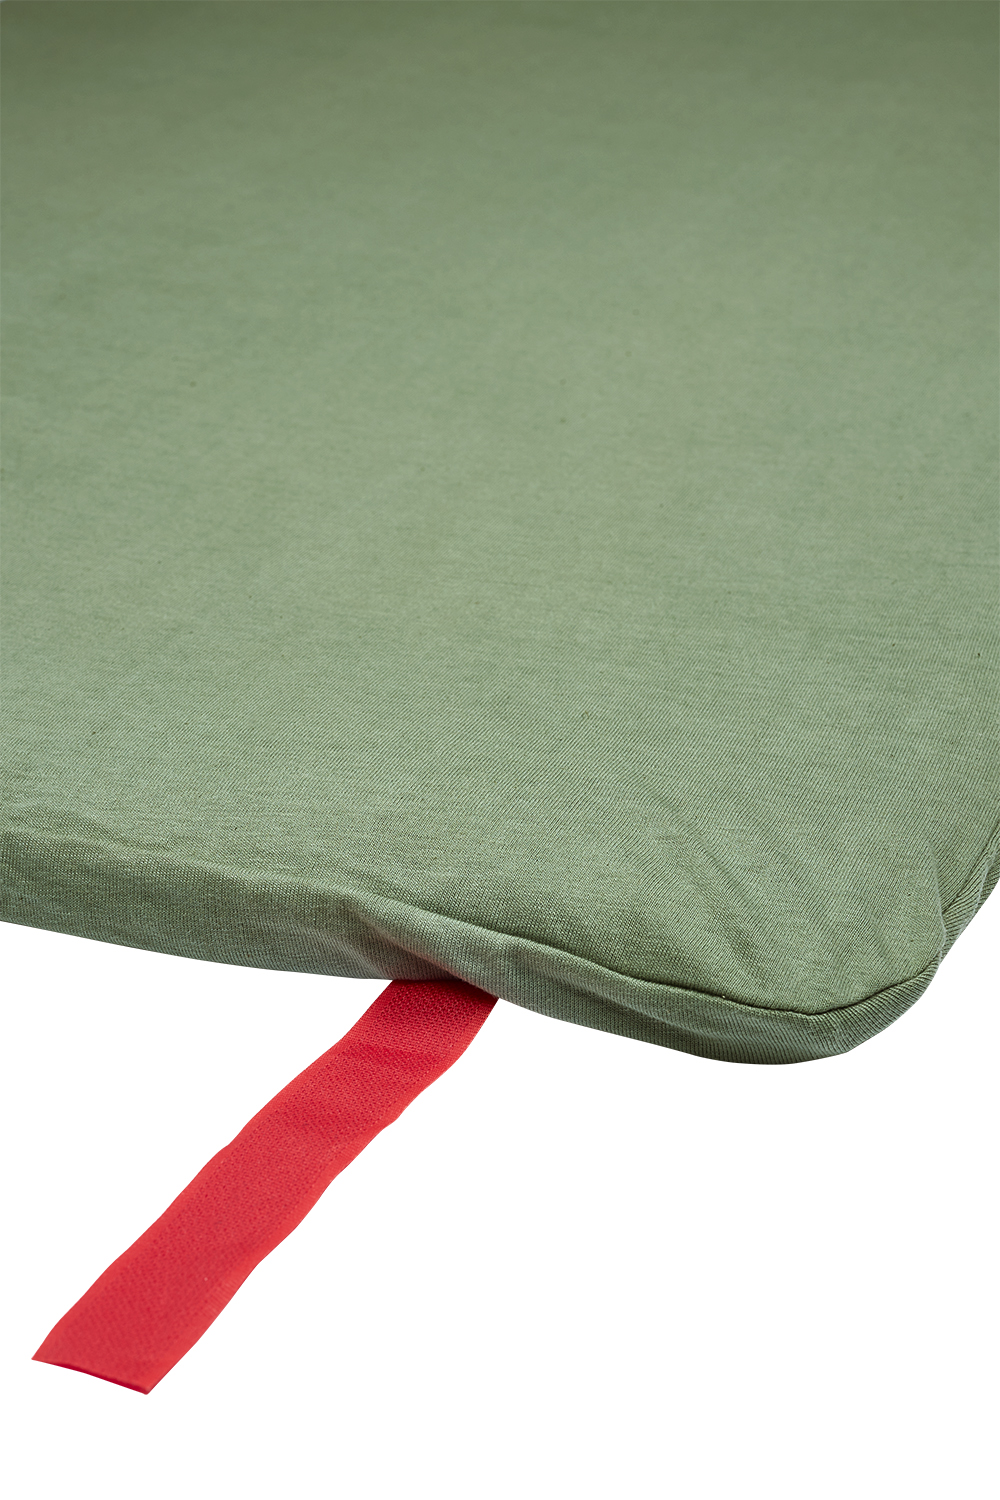 Jersey Campingbed Mattress Cover DeLuxe - Forest Green - 60x120cm 